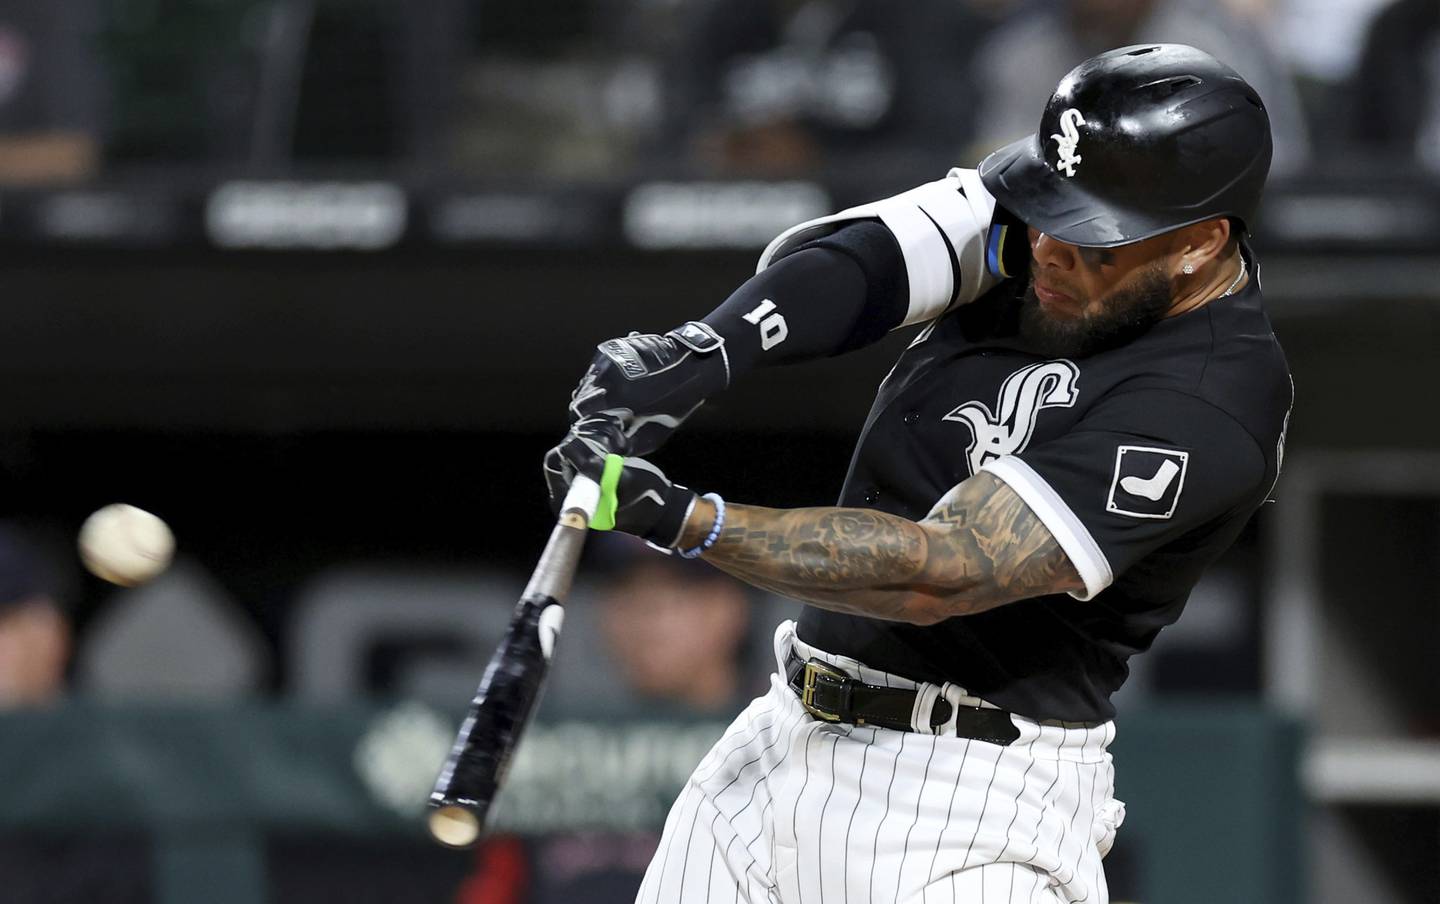 White Sox third baseman Yoán Moncada homers against the Guardians on Sept. 21, 2022, at Guaranteed Rate Field.